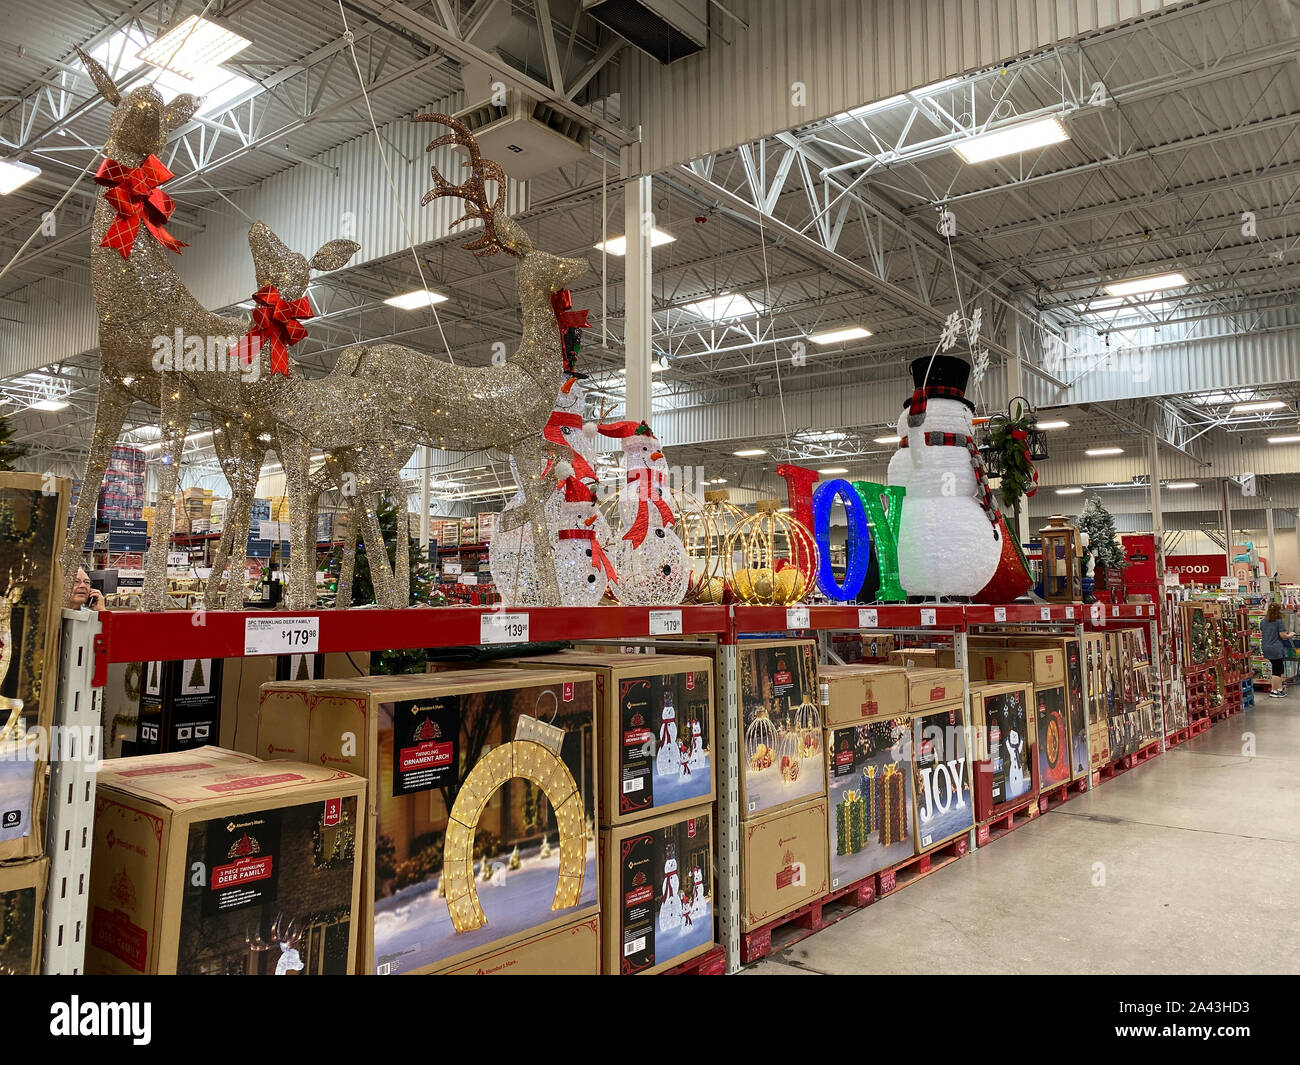 Orlando,FL/USA -10/11/19: The Christmas decoration aisle of a Sams Club  retail store with a variety of new Christmas decorations ready to be  purchase Stock Photo - Alamy